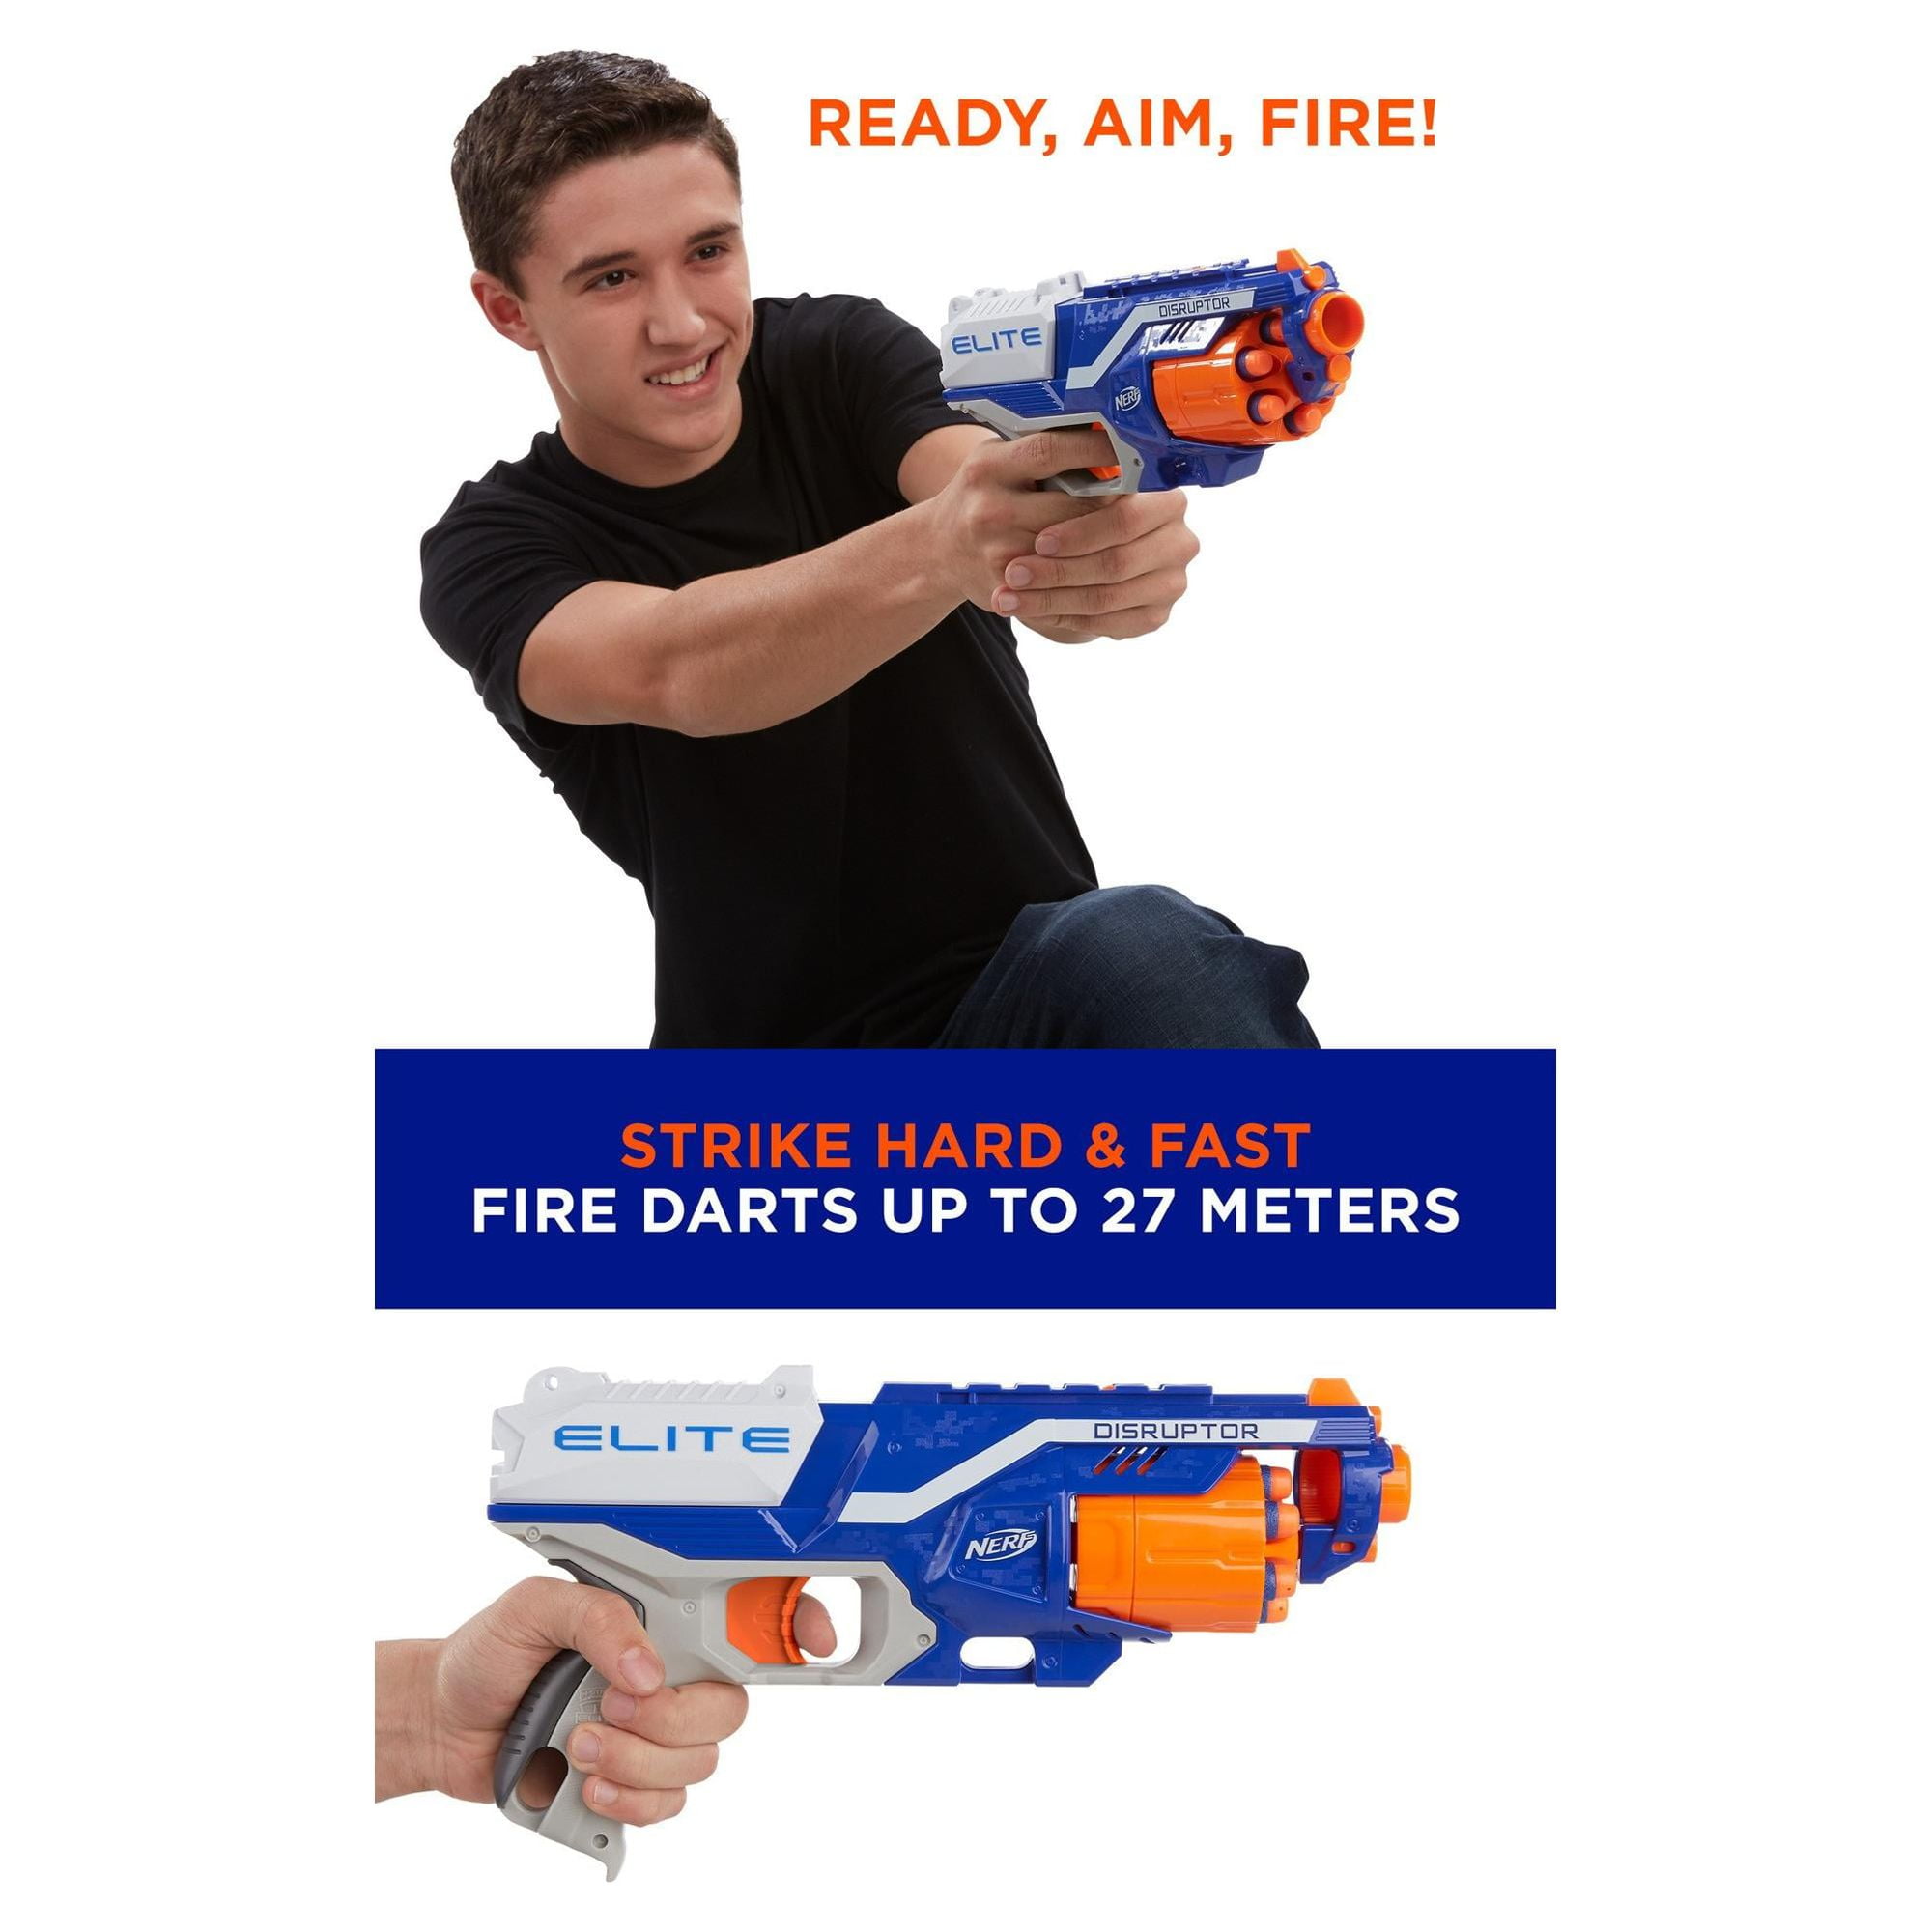  Nerf Disruptor Elite Blaster - 6-Dart Rotating Drum, Slam Fire,  Includes 6 Official Nerf Elite Darts - for Kids, Teens, Adults, (  Exclusive) : Toys & Games